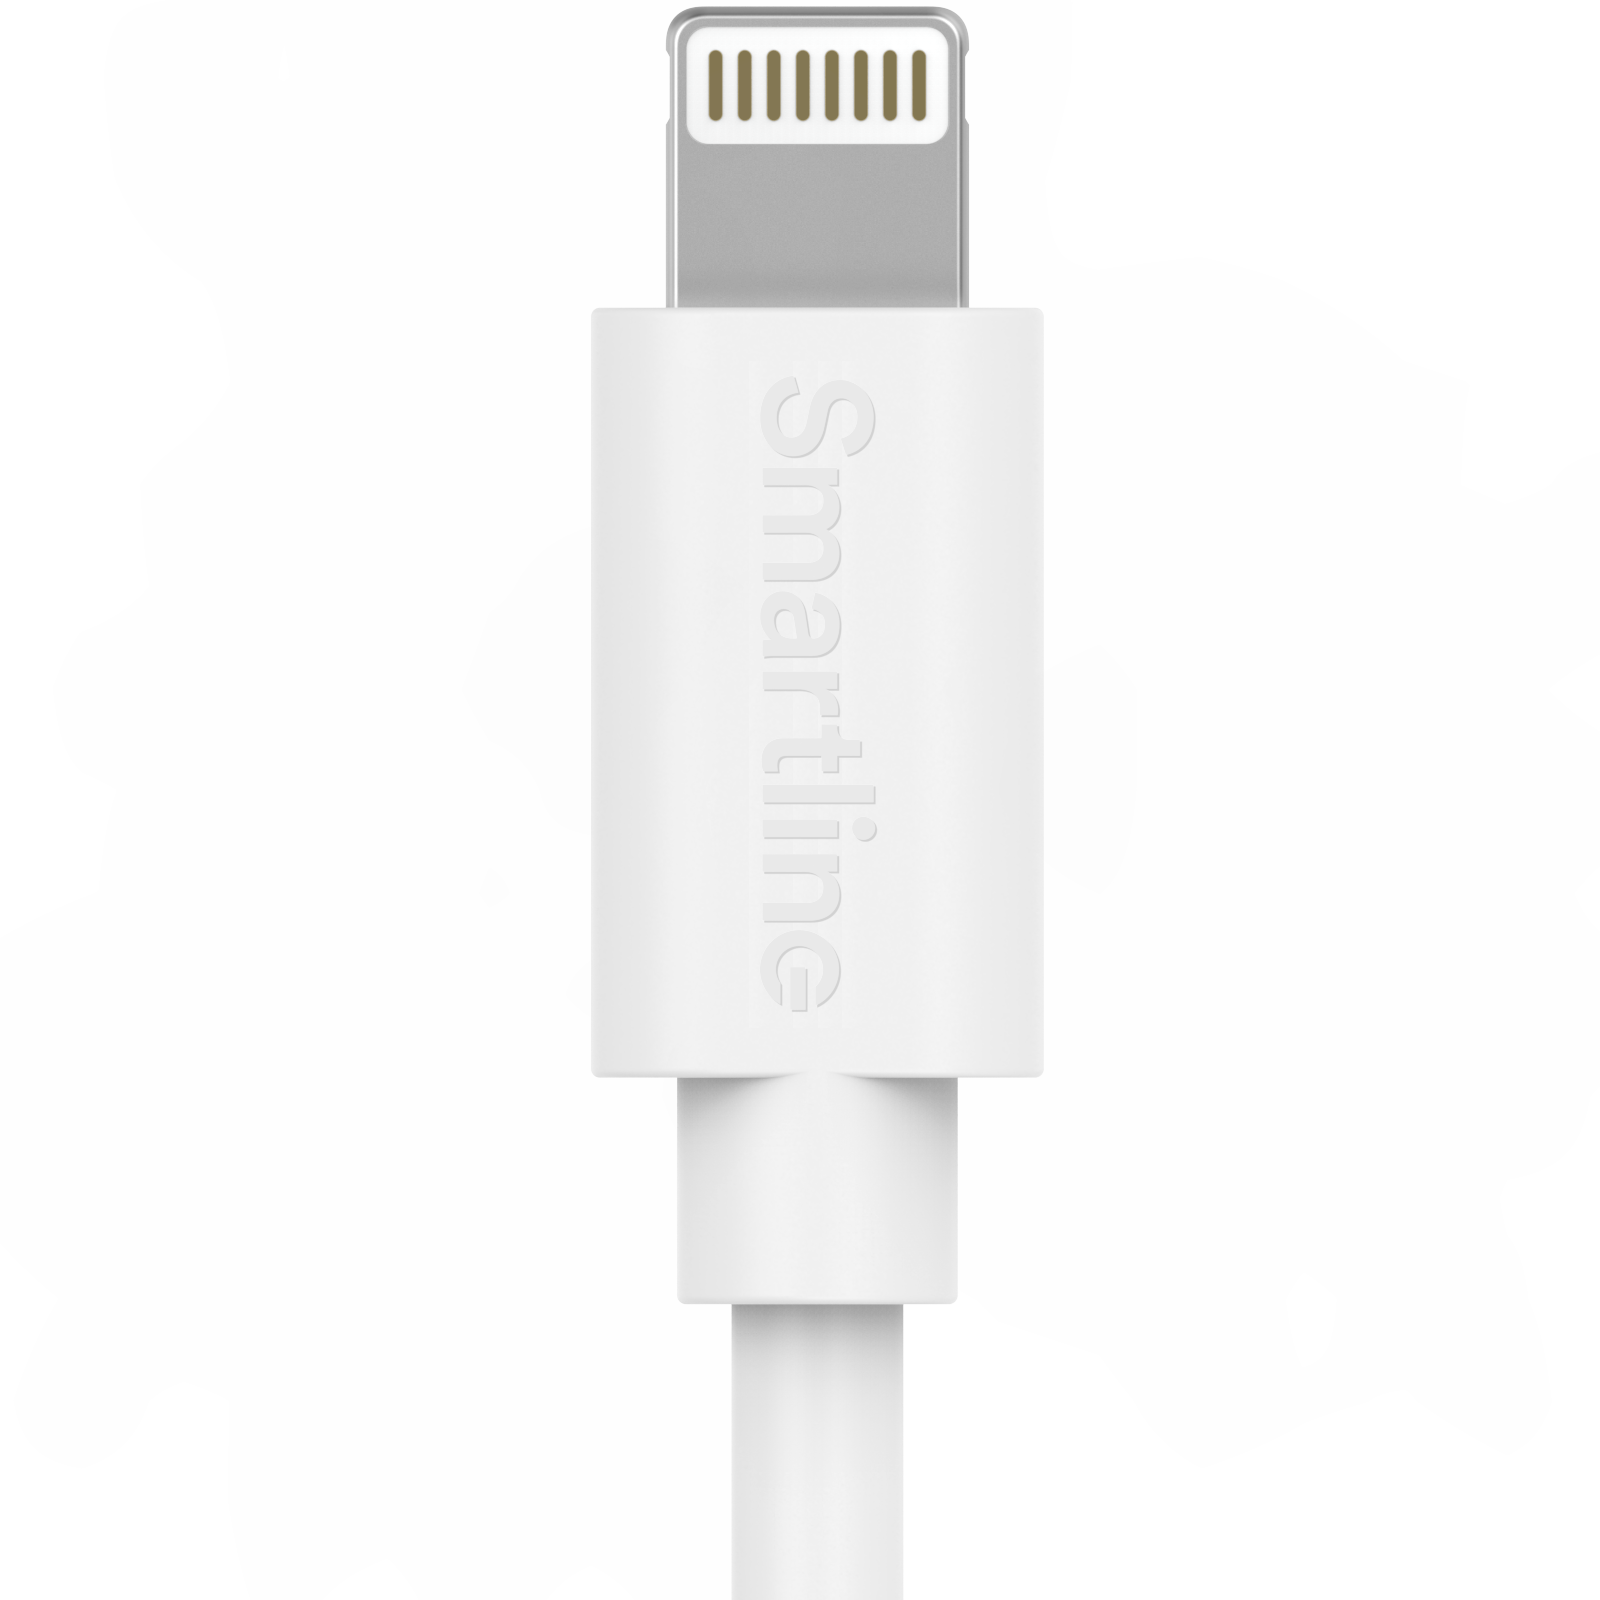 Complete Charger for iPhone 7 - 2m Cable and Wall Charger - Smartline